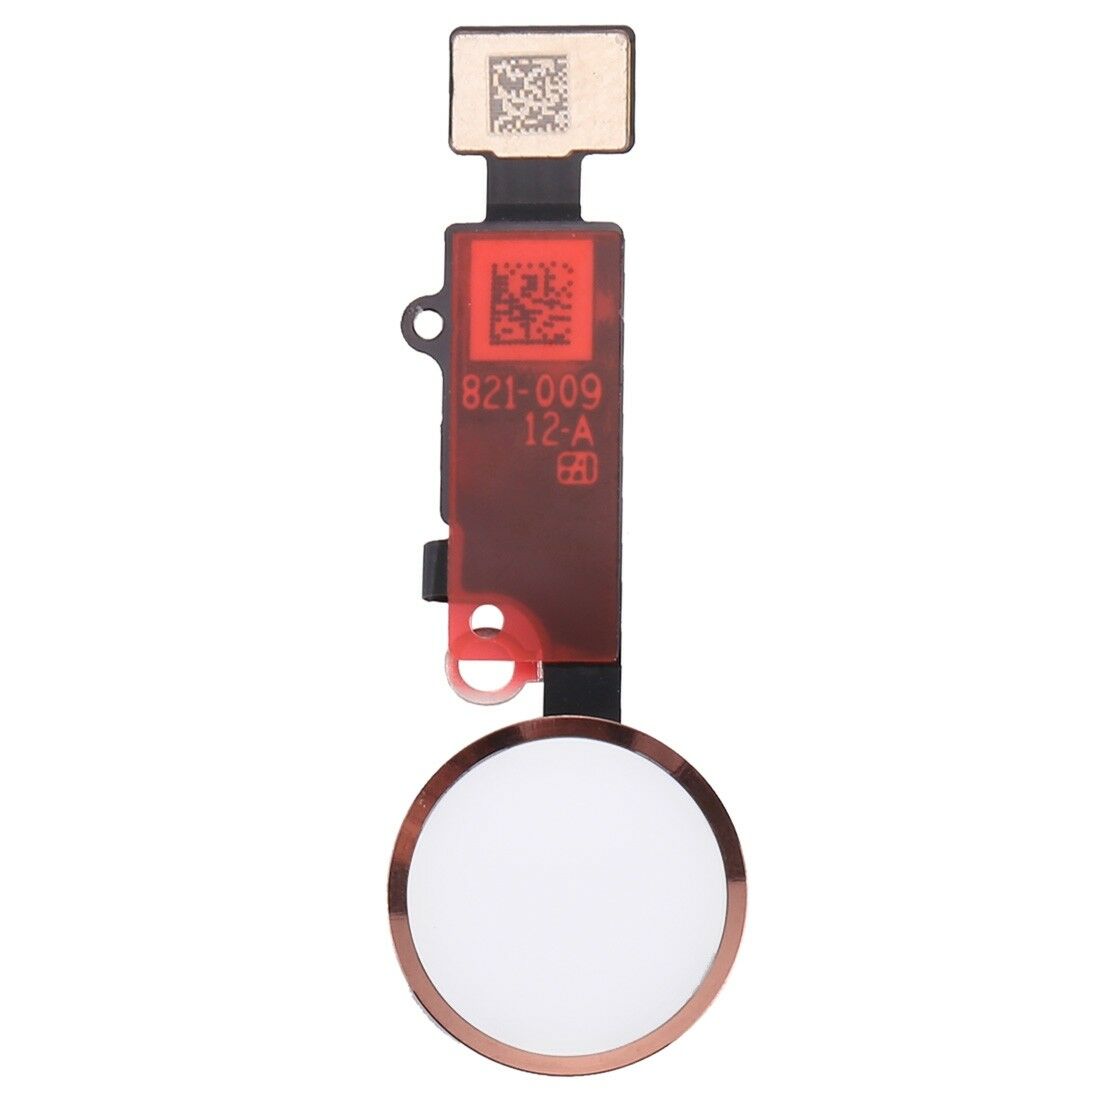 Apple iPhone 8 / 8 Plus Home Button Flex Cable - Gold for [product_price] - First Help Tech